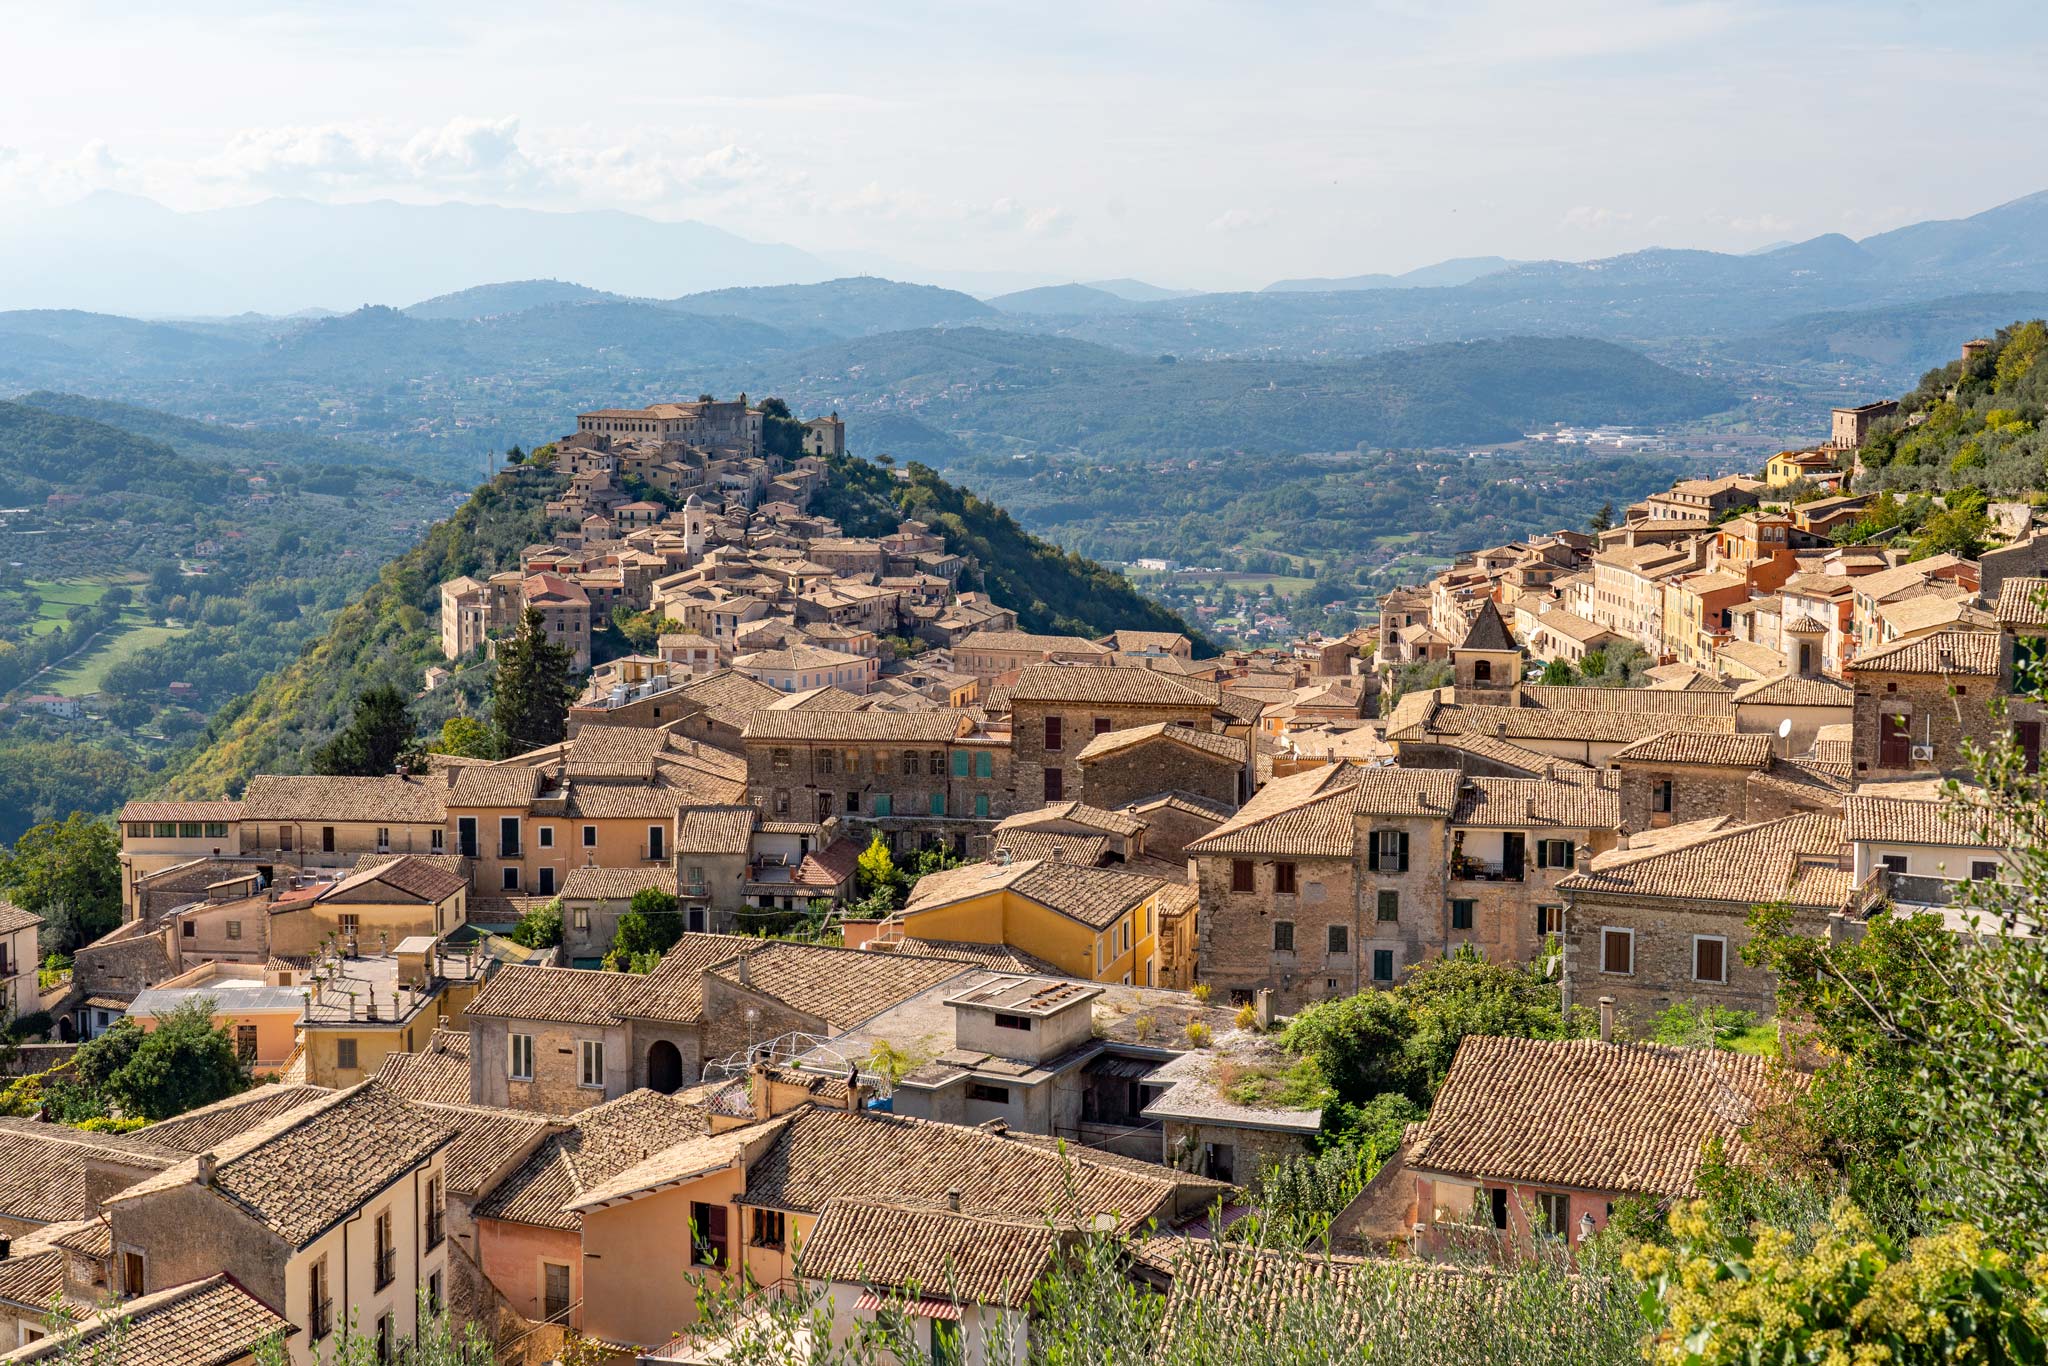 Arpino's sprawling town is one of the best places to see near Rome